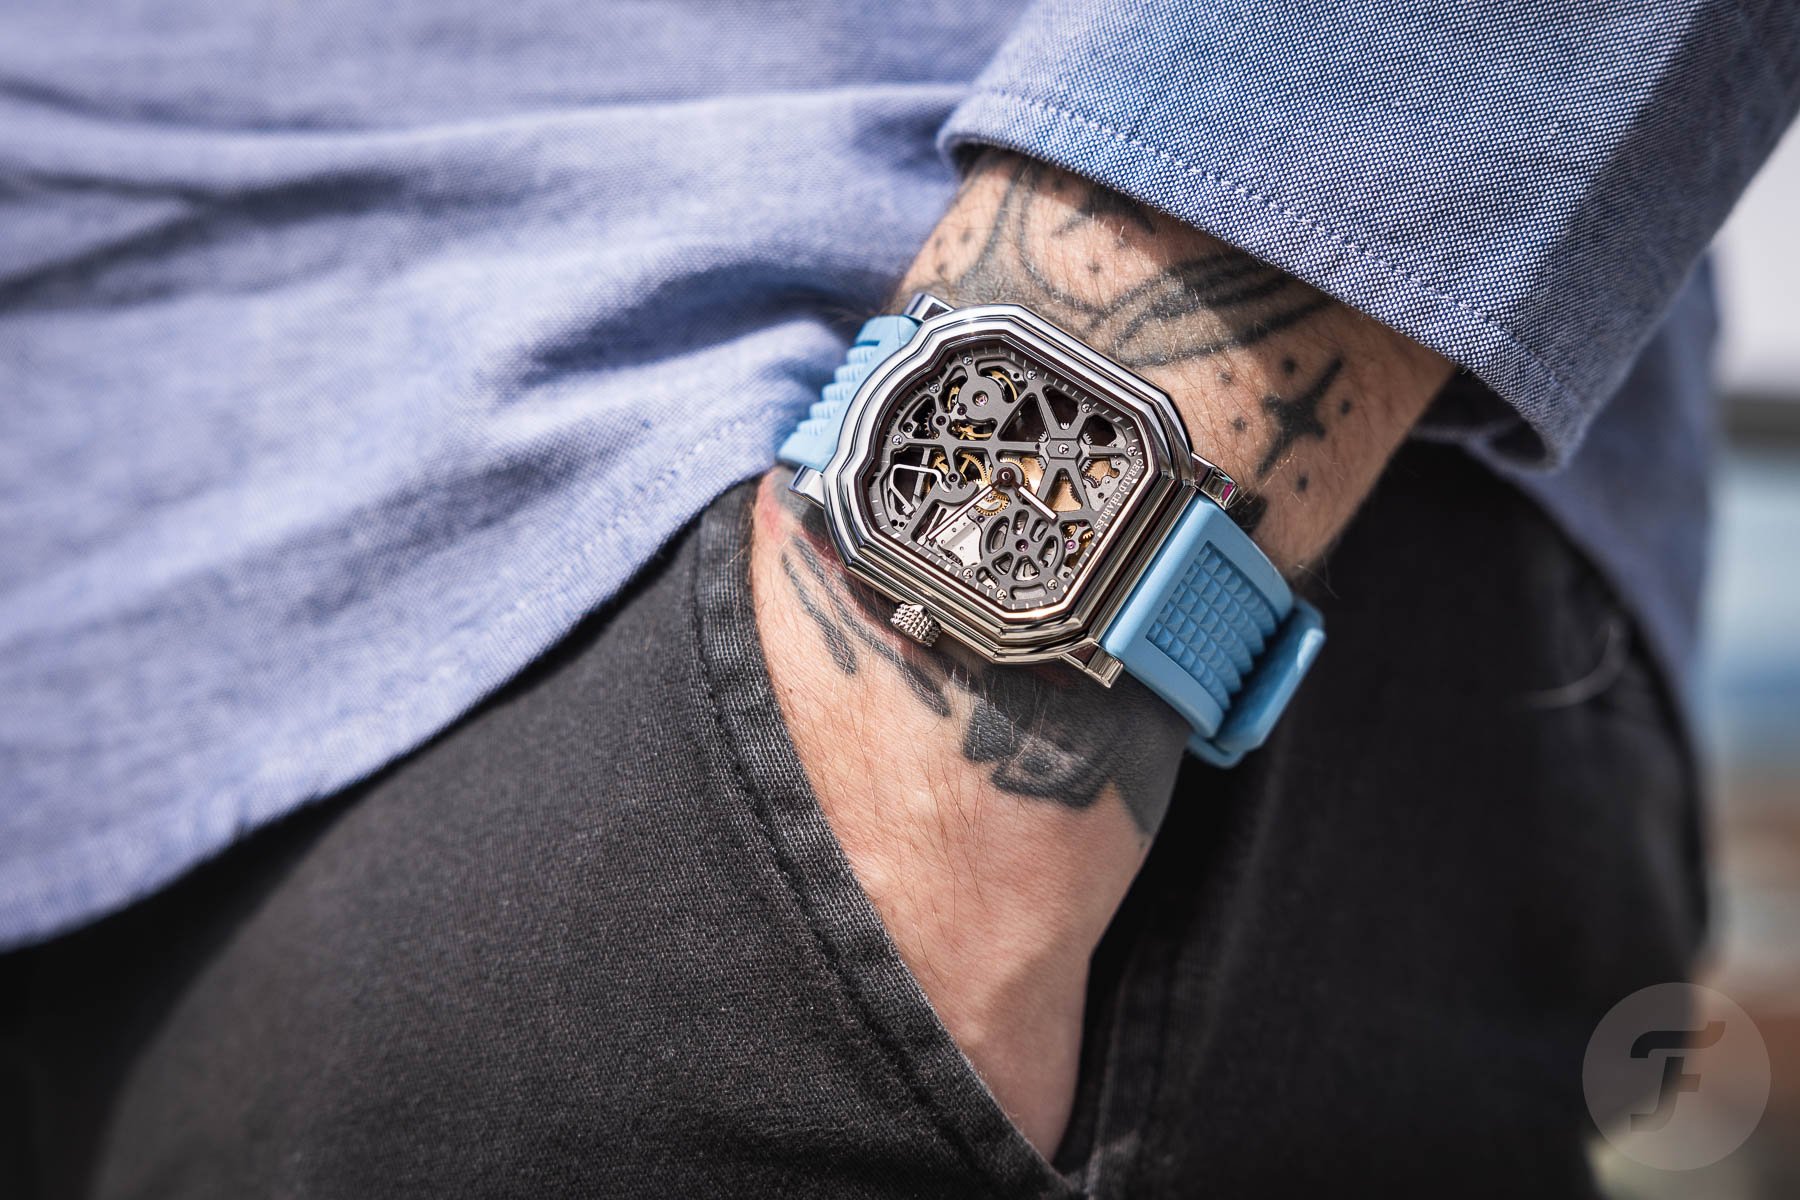 Hands-On With The Gerald Charles Maestro 8.0 Squelette In Stainless Steel